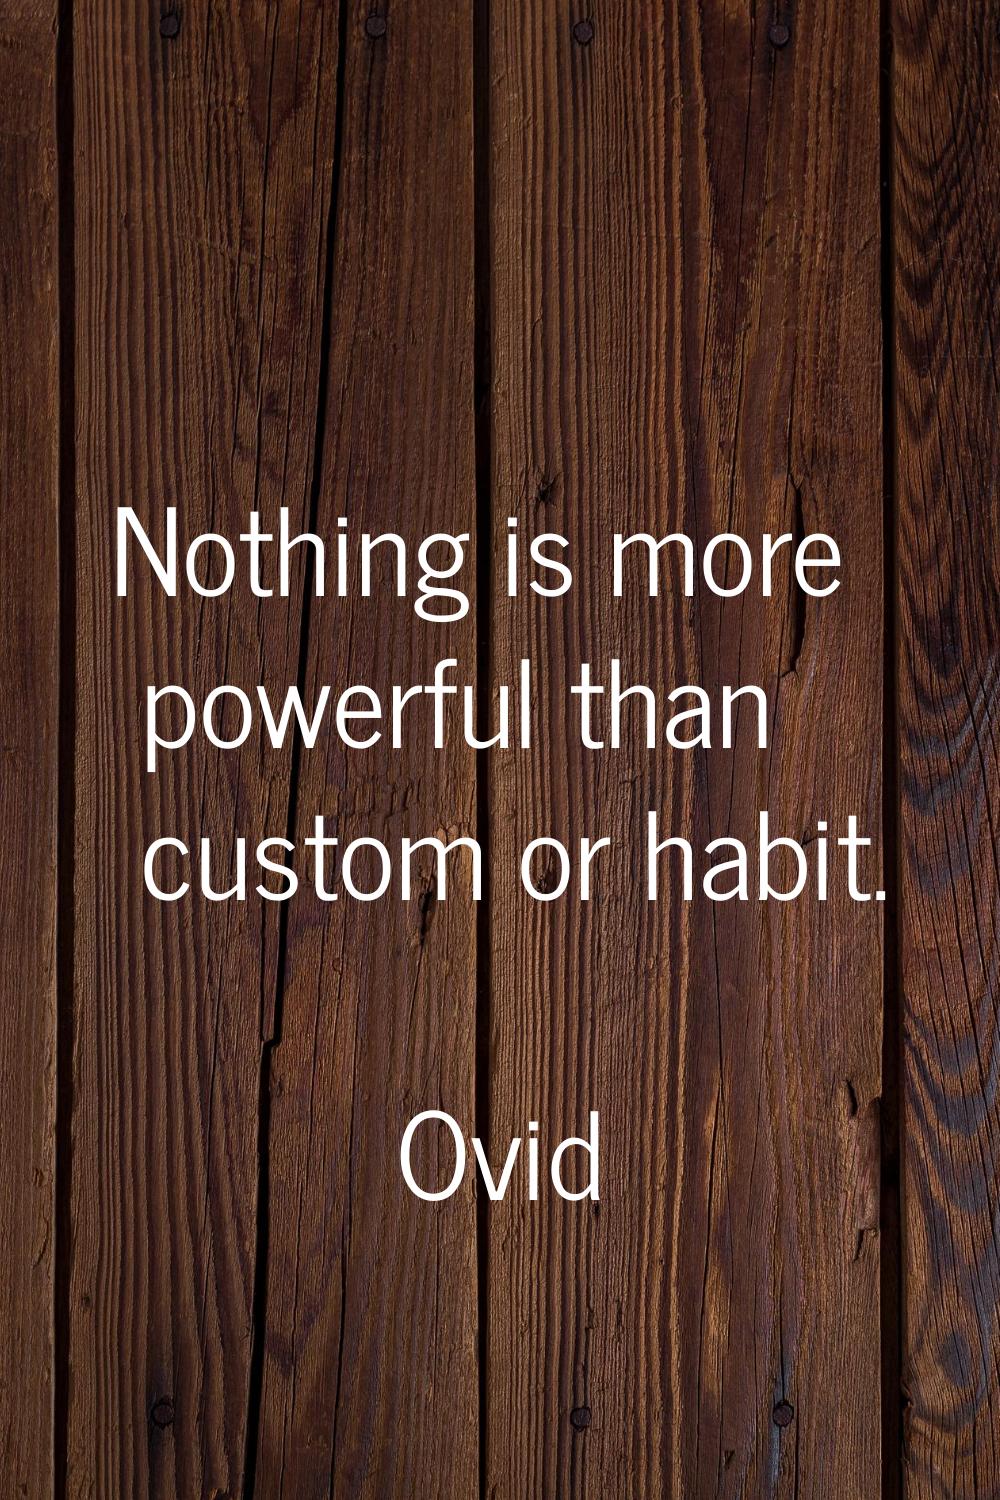 Nothing is more powerful than custom or habit.